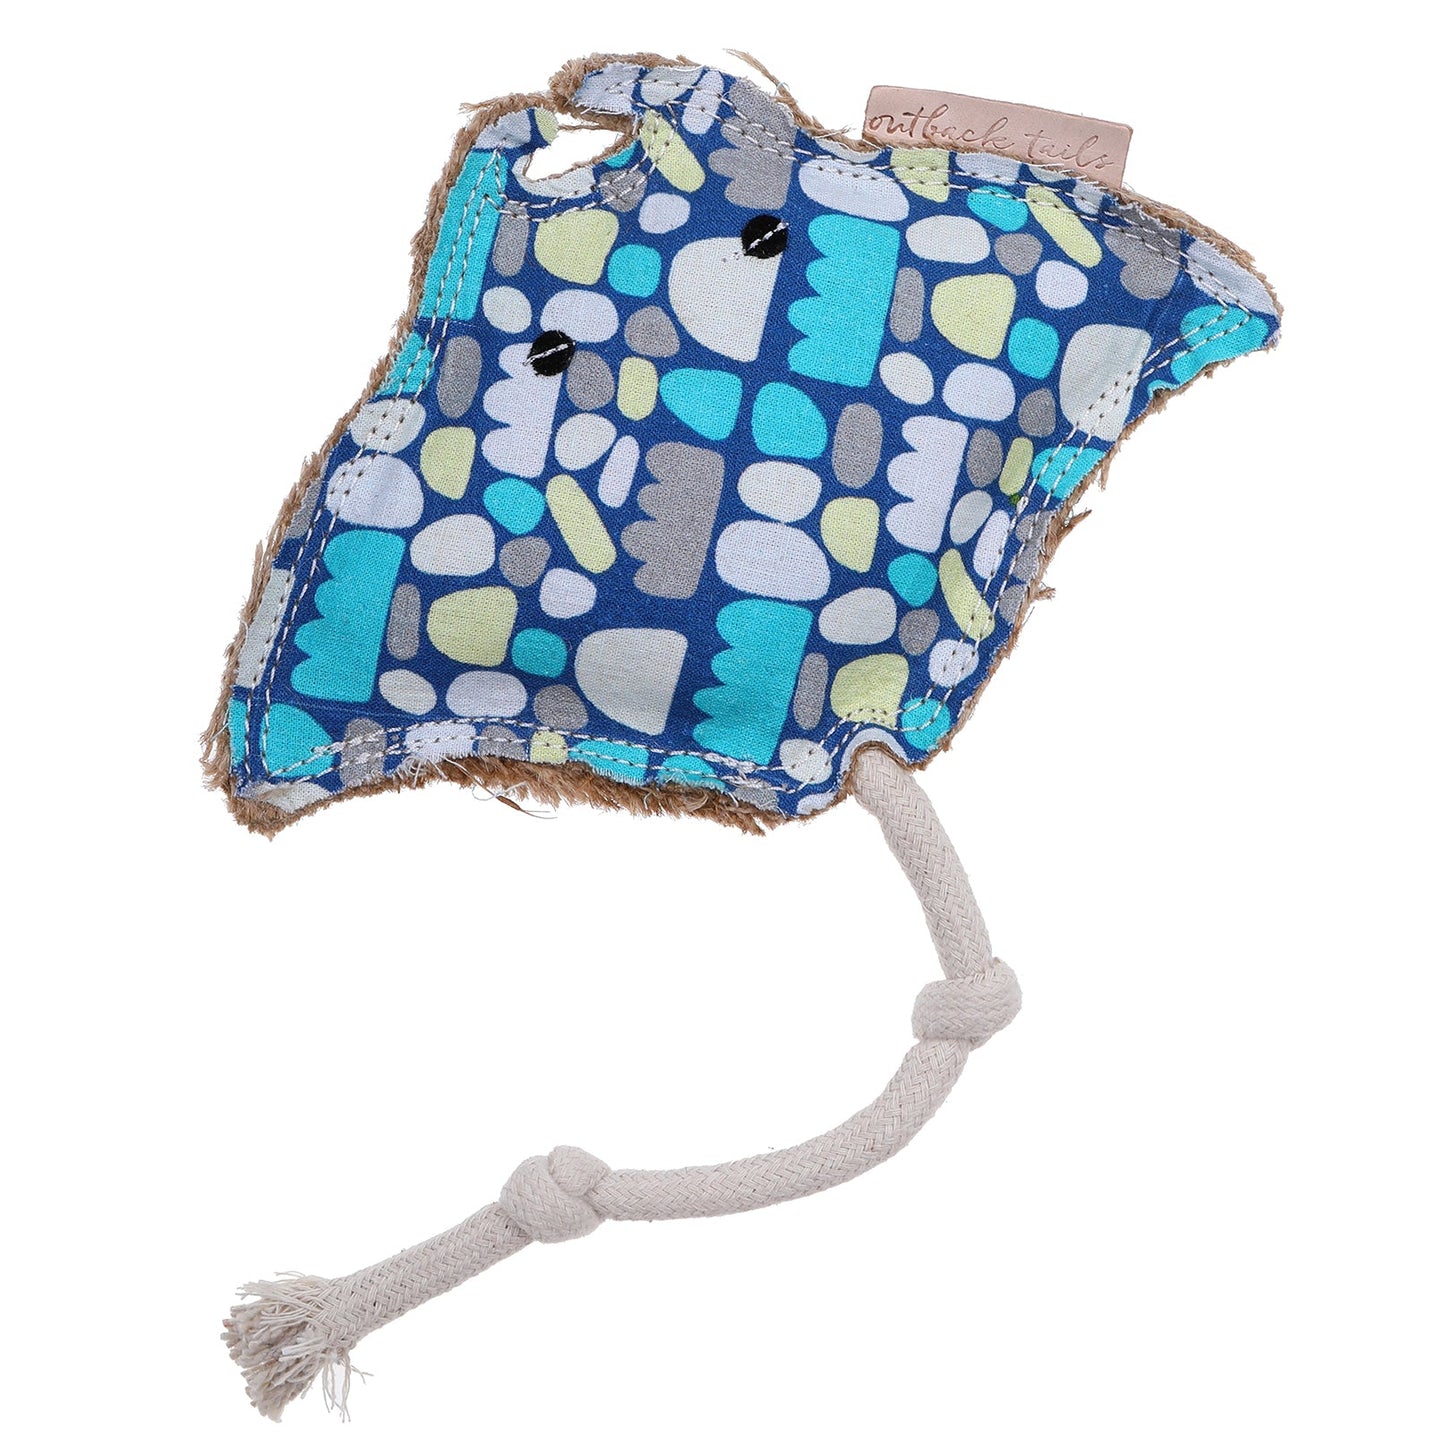 Sheree the stingray dog toy by outback tails on a white background. The toys shows the indigenous artwork print and natural fibres and double stitching with knotted natural rope for tugging